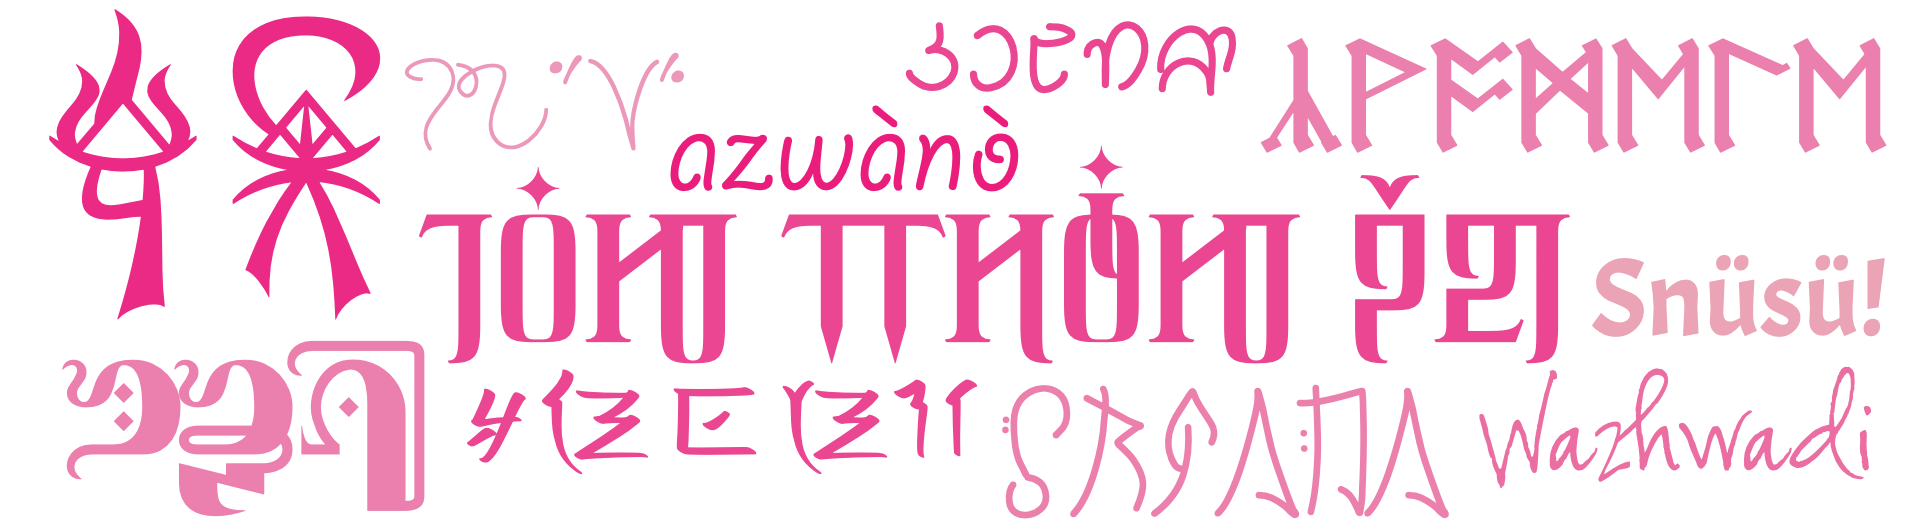 An image with multiple ways of saying "hello" and "welcome" in a variety of conlangs